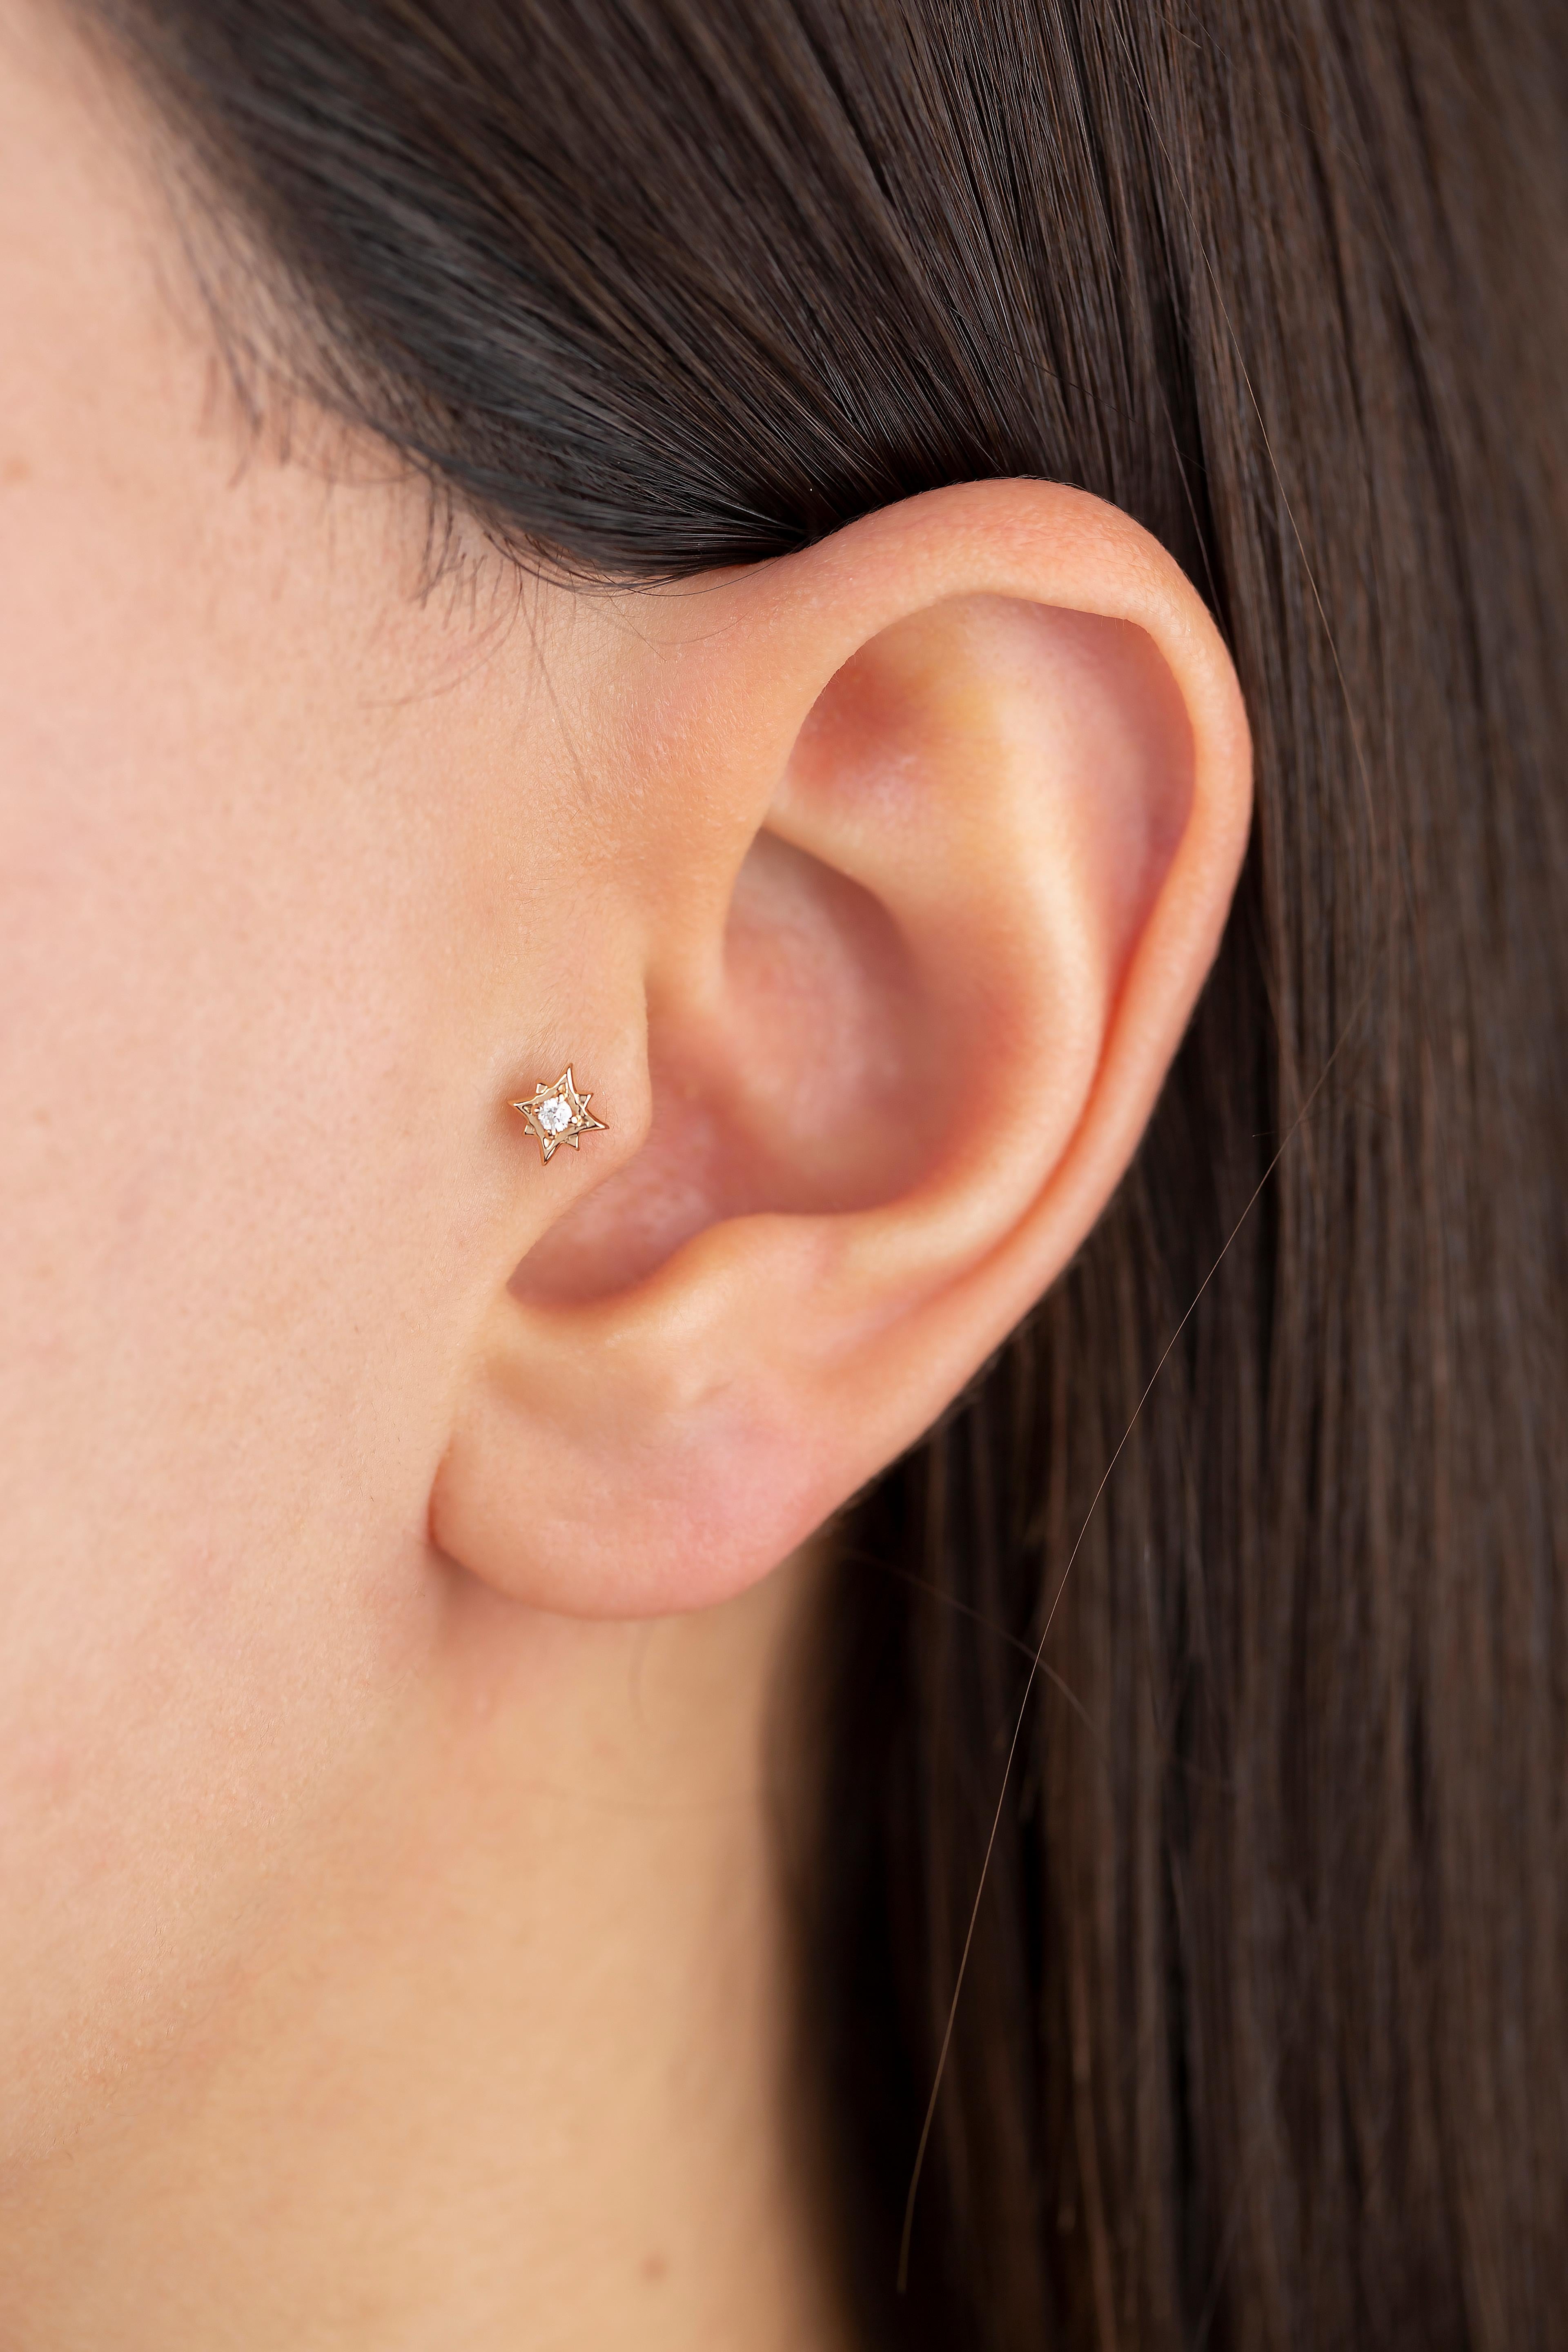 14K Gold 0.03 Ct Diamond North Star Piercing, Gold North Star Diamond Earring

You can use the piercing as an earring too! Also this piercing is suitable for tragus, nose, helix, lobe, flat, medusa, monreo, labret and stud.

This piercing was made